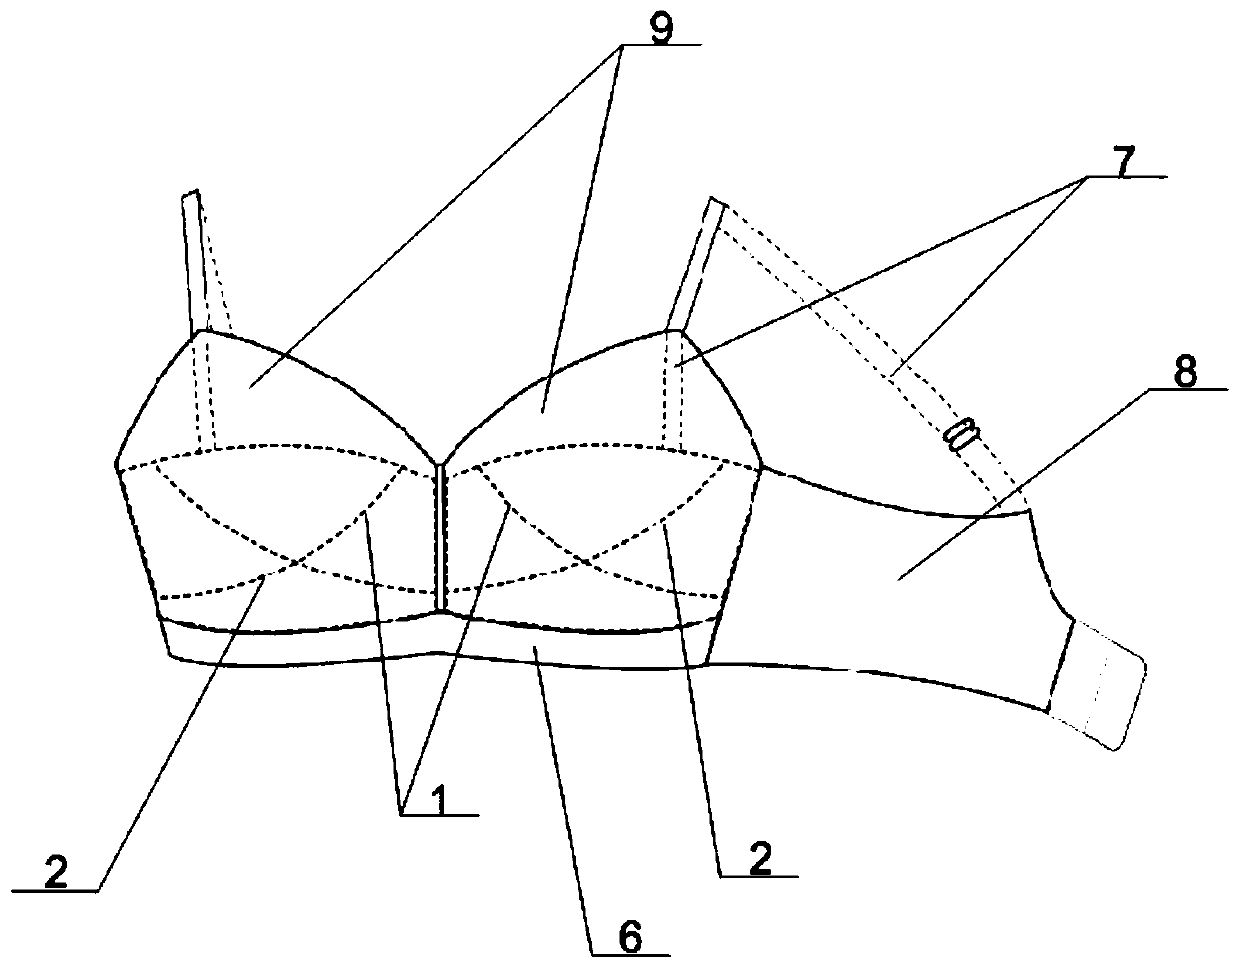 Large cup structure capable of realizing partitioned supporting and optimizing fat distribution and novel bra